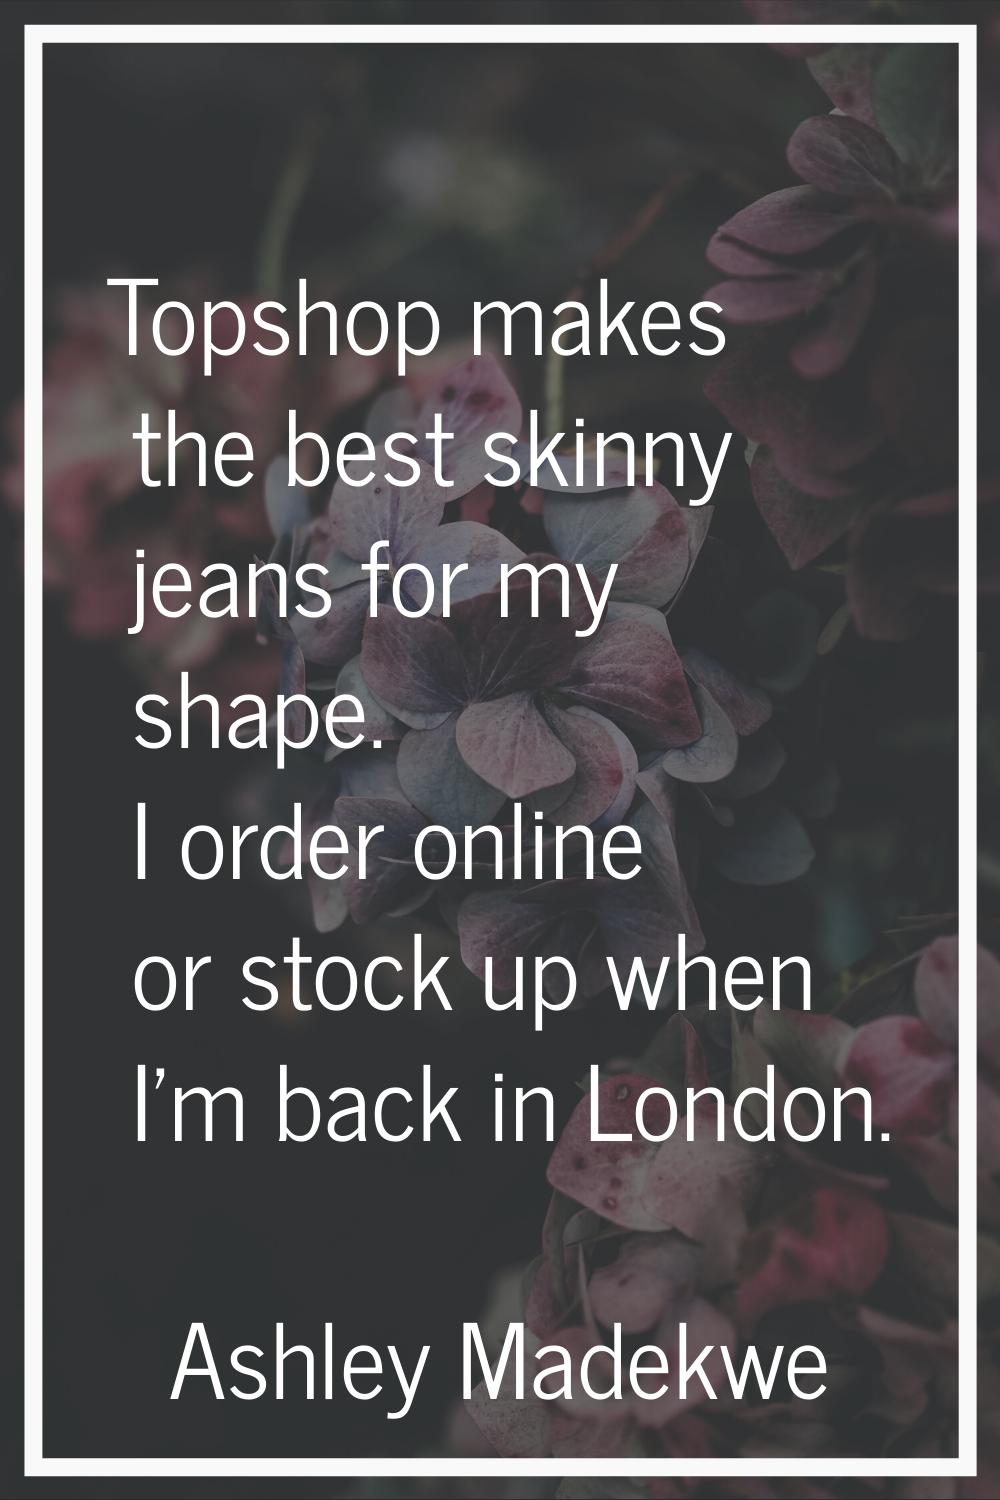 Topshop makes the best skinny jeans for my shape. I order online or stock up when I'm back in Londo